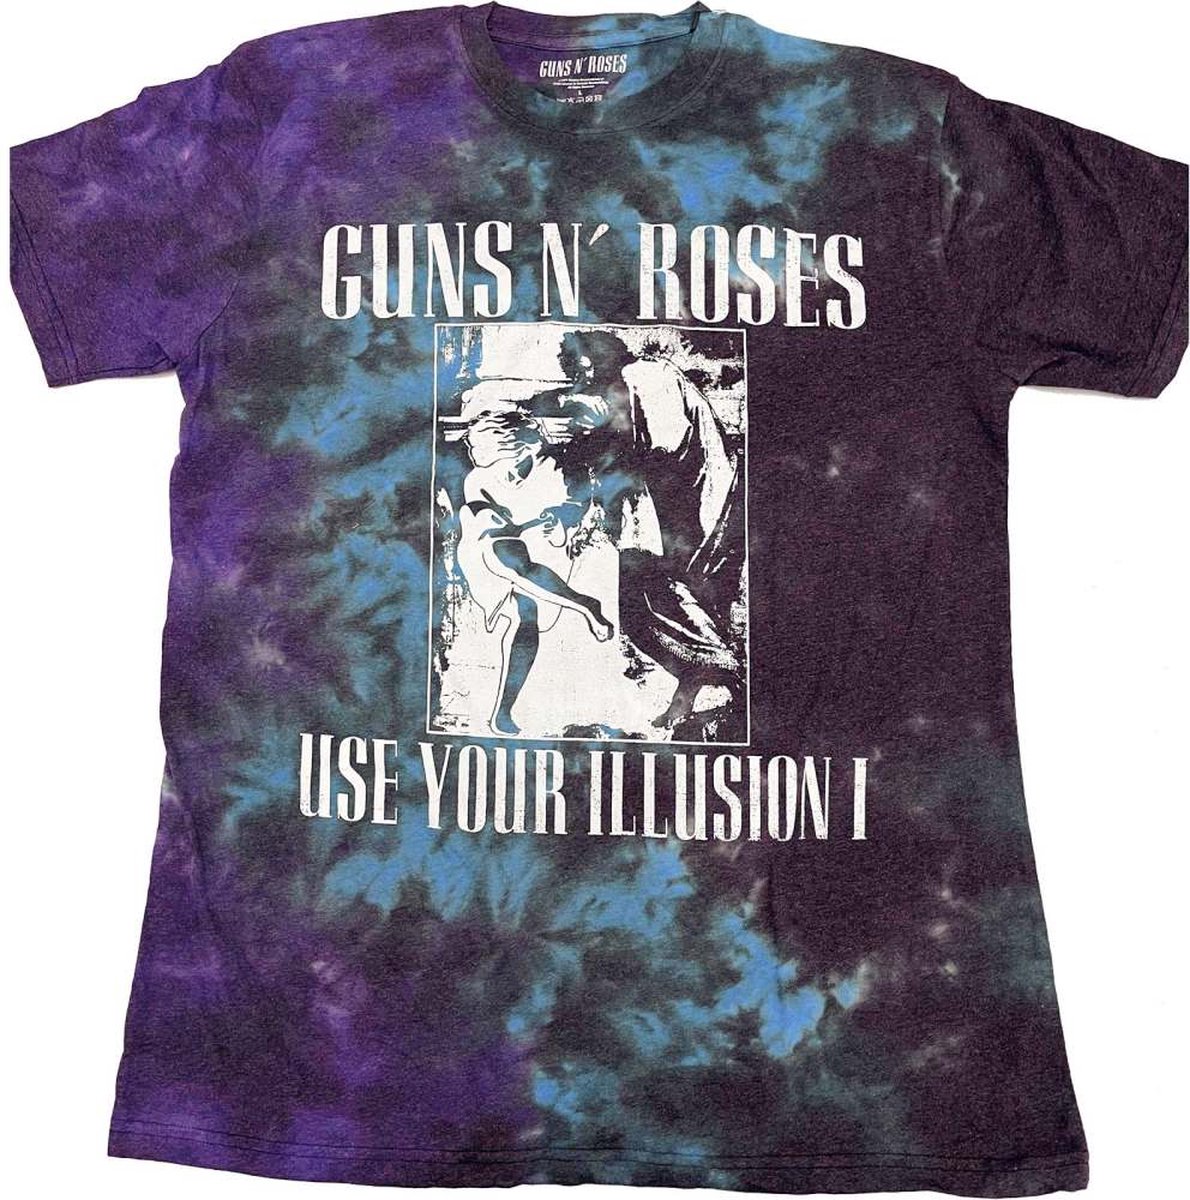 Guns N' Roses - Use Your Illusion Monochrome Heren T-shirt - XL - Blauw/Paars